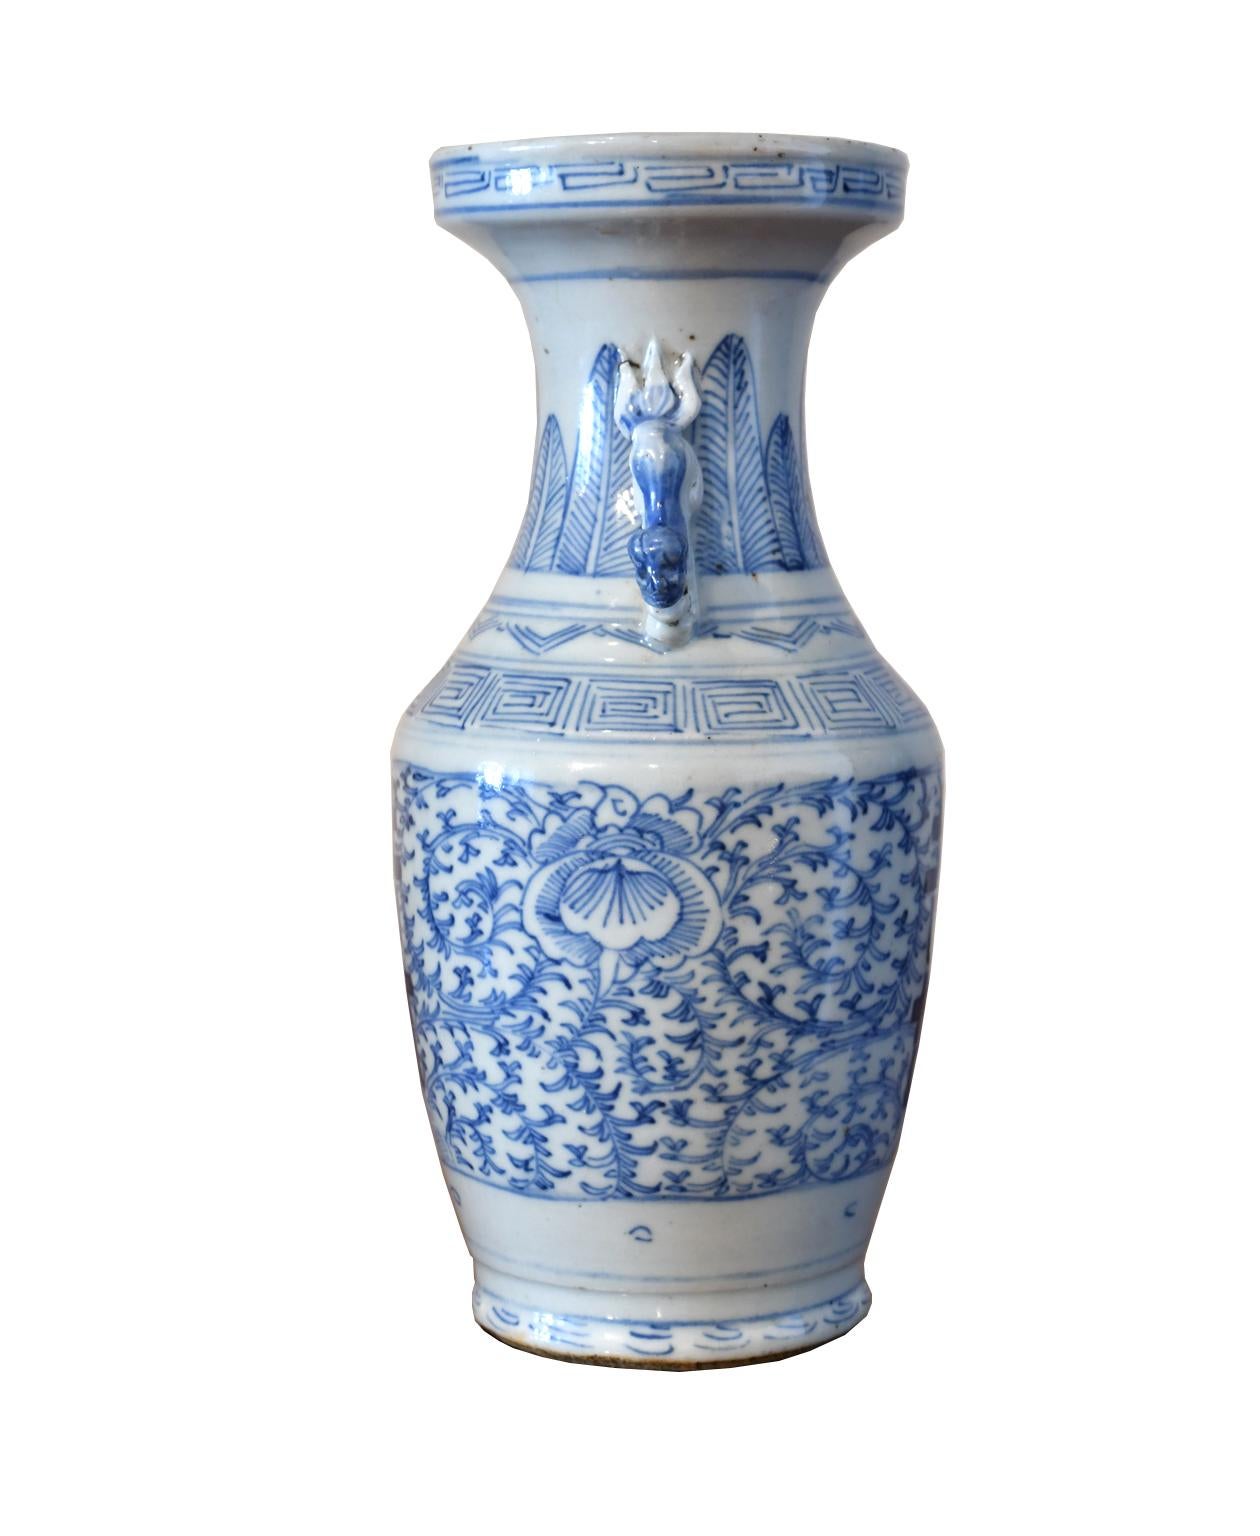 Details about   RARE BLUE AND WHITE PORCELAIN FLOWER VASE OF CHINESE ANTIQUE 